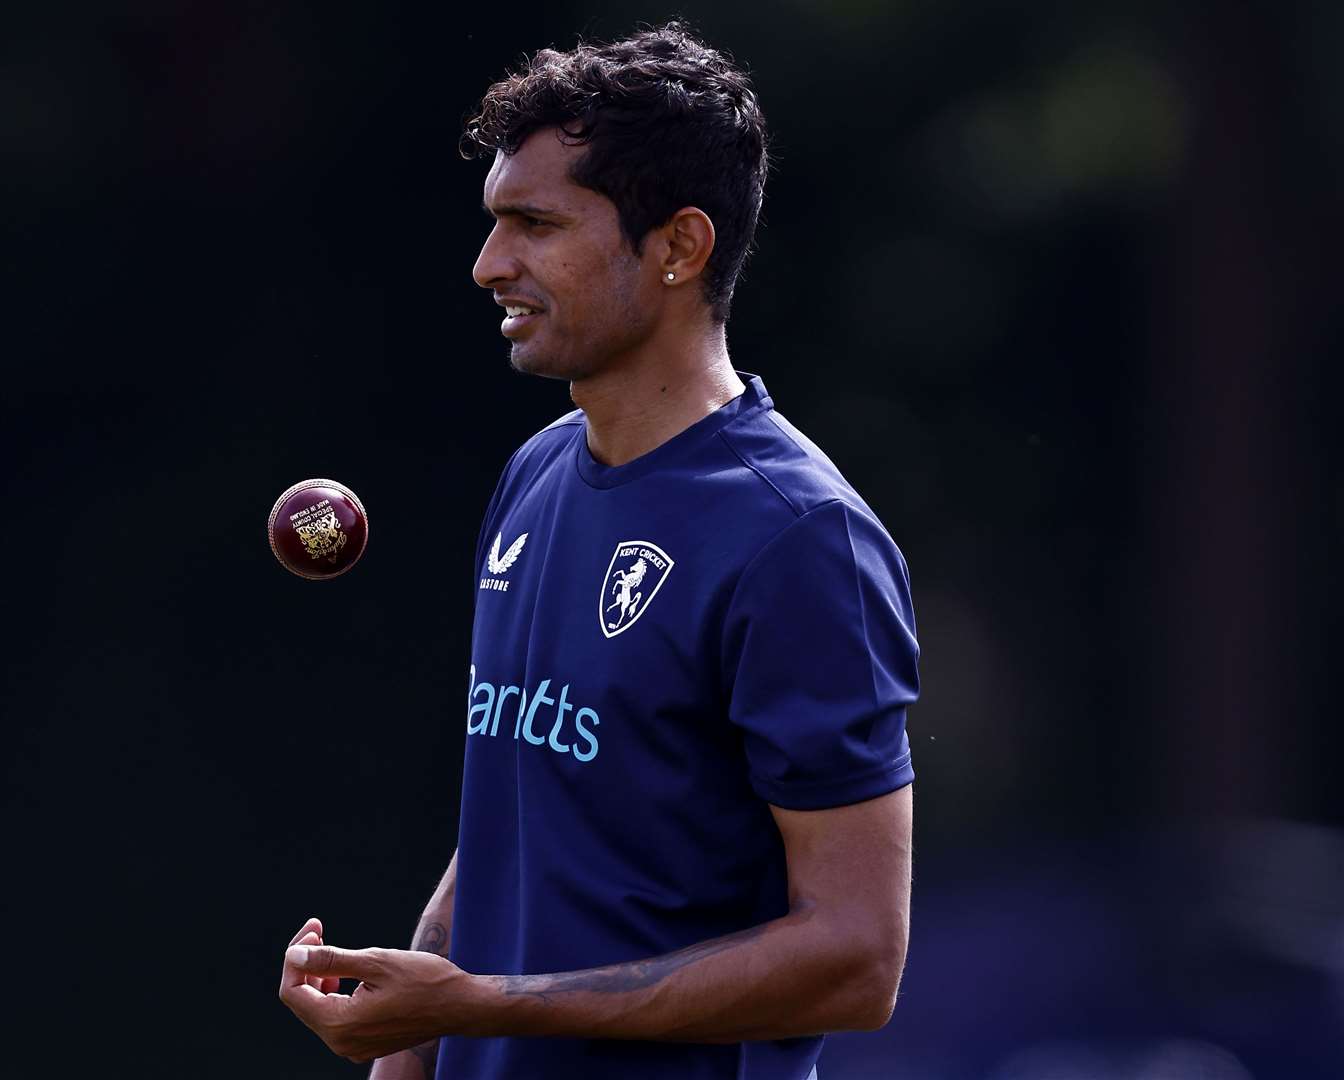 India paceman Navdeep Saini is unlikely to return to Kent this year after a spell with the club earlier in the summer. Picture: Max Flego Photography